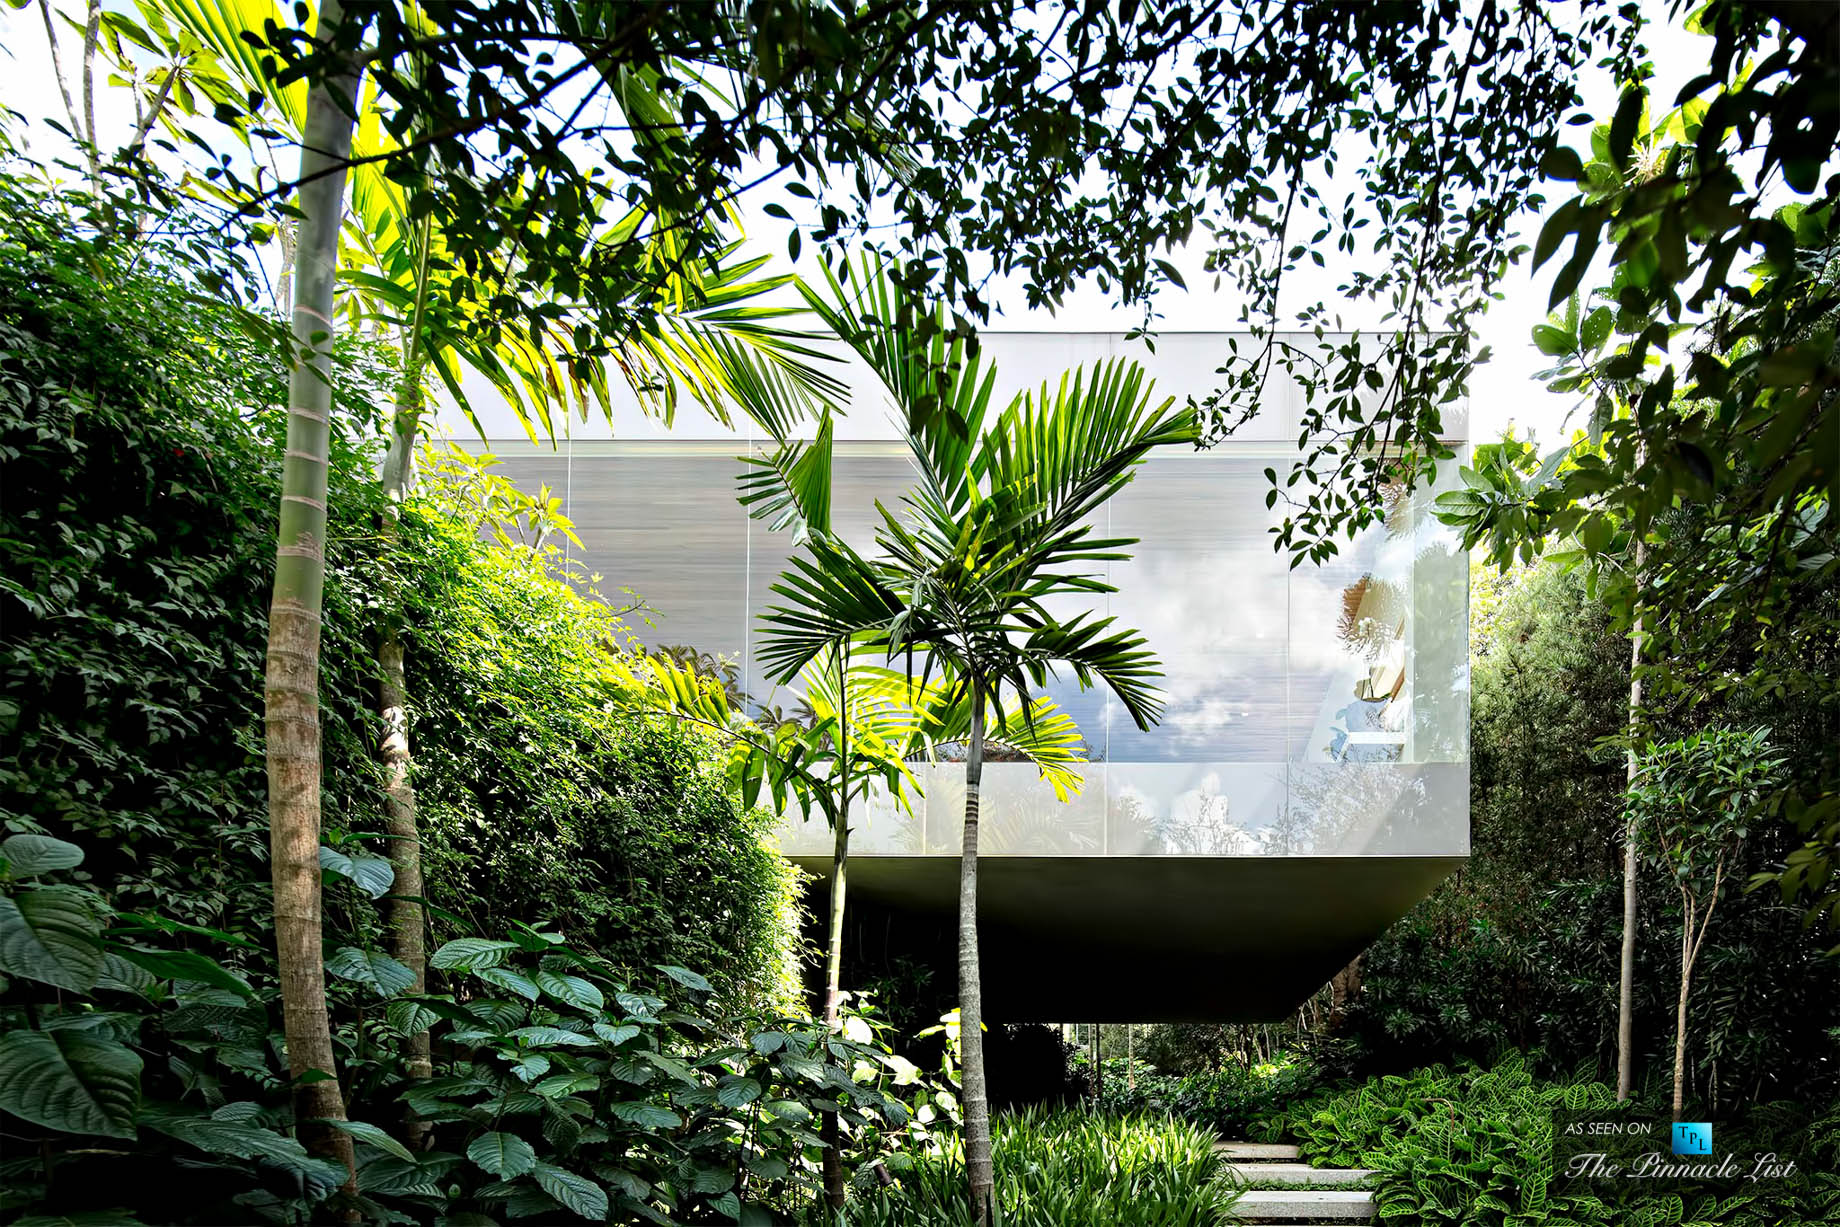 Casa Geneses Sao Paulo Brazil - Isay Weinfeld - A Global Architect with Timeless Modernist Sensibility